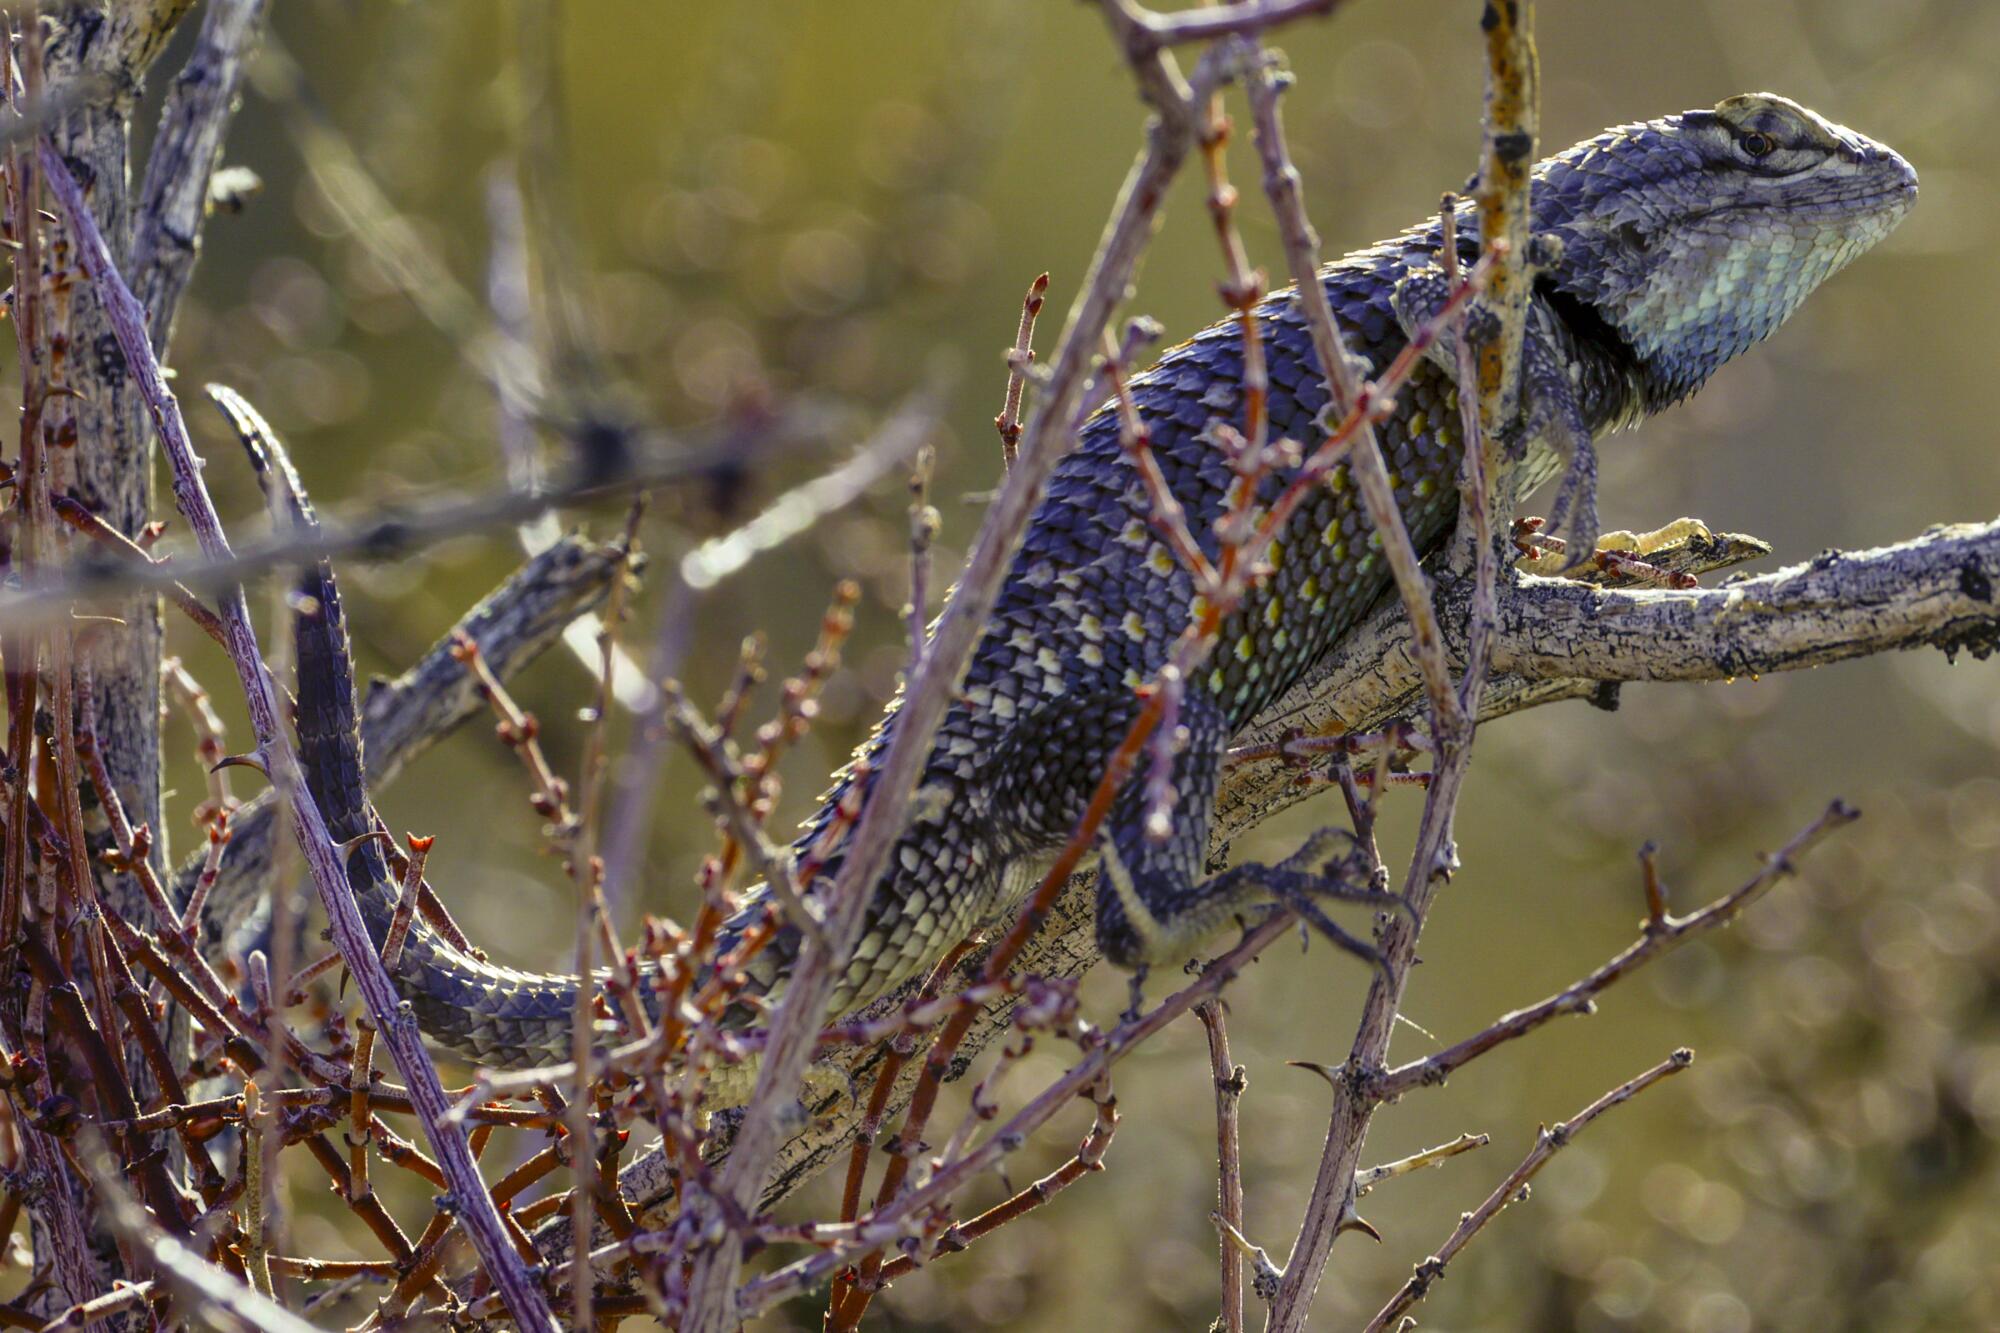 A lizard clings to bare branches of a bush.